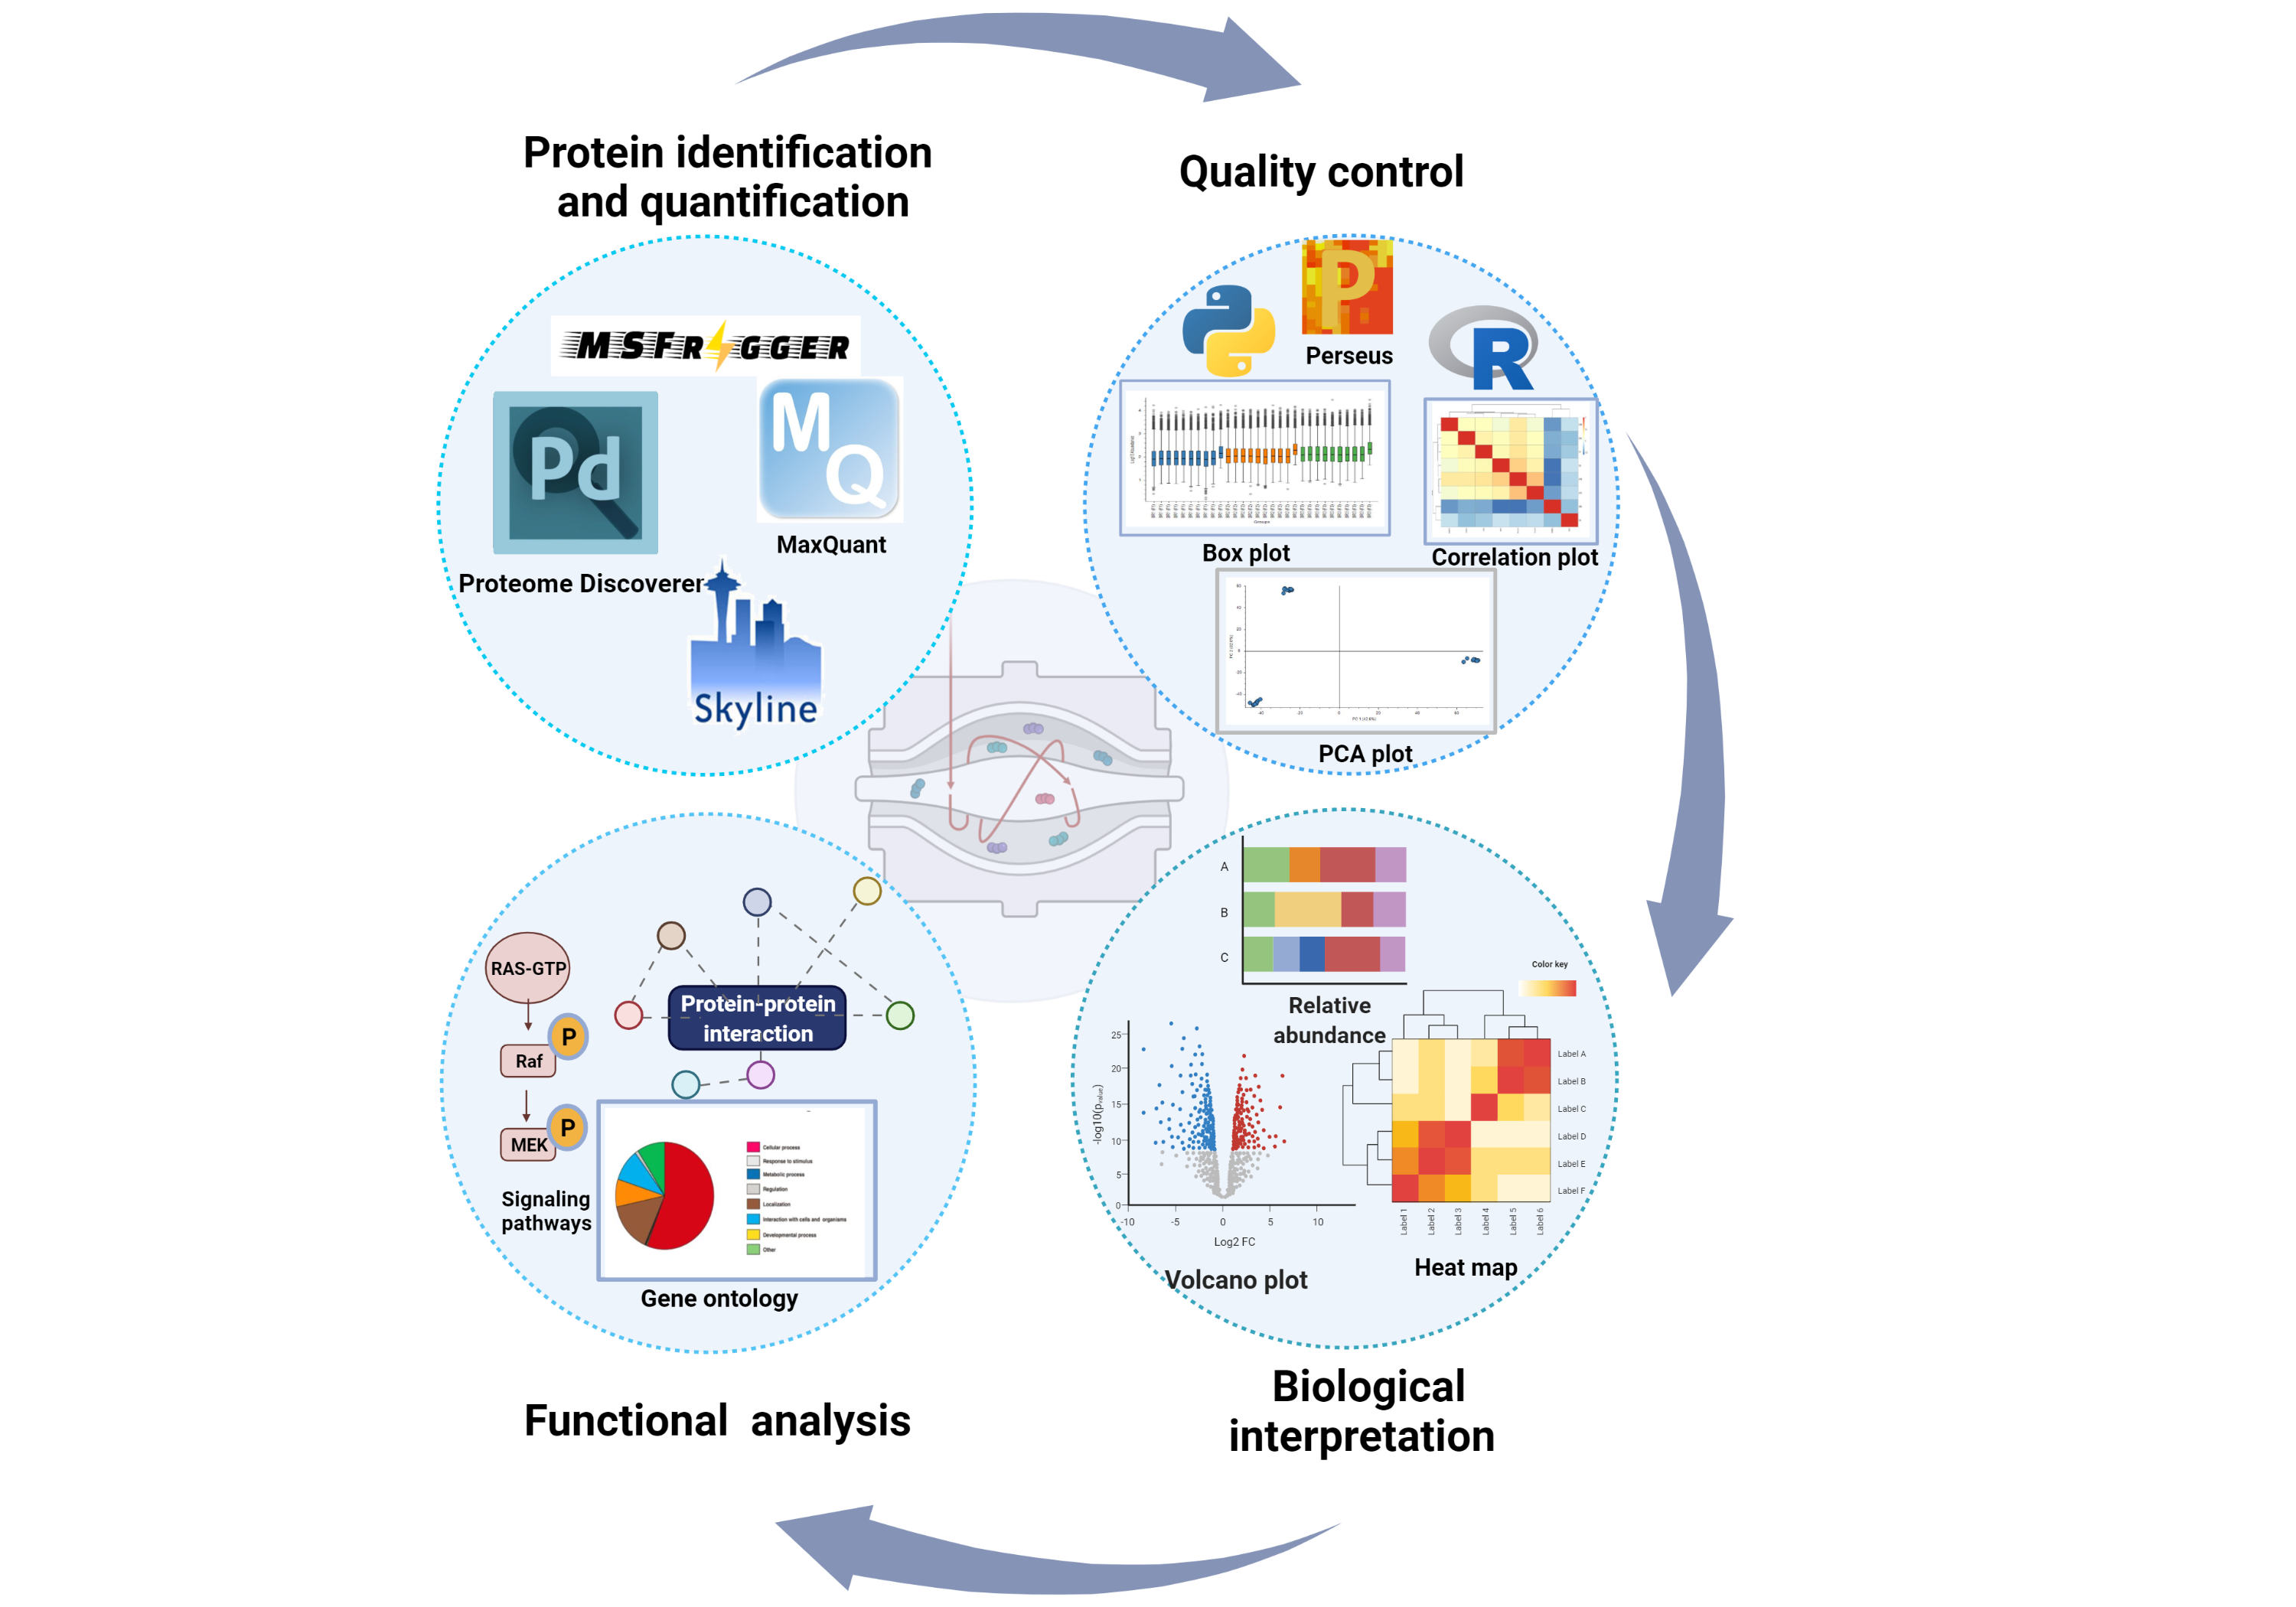 Figure 16: Proteomics Data Analysis and Biological Interpretation. The process begins with protein identification and quantification using tools such as Proteome Discoverer, Spectronaut, Spectromine, MS Fragger, MaxQuant, and Skyline. Quality control measures ensure data integrity, leading to a biological interpretation of the results. Differential expression analyses may include relative abundance charts, heat maps, and volcano plots. Functional analysis encompasses gene ontology, protein-protein interactions, and signaling pathways.